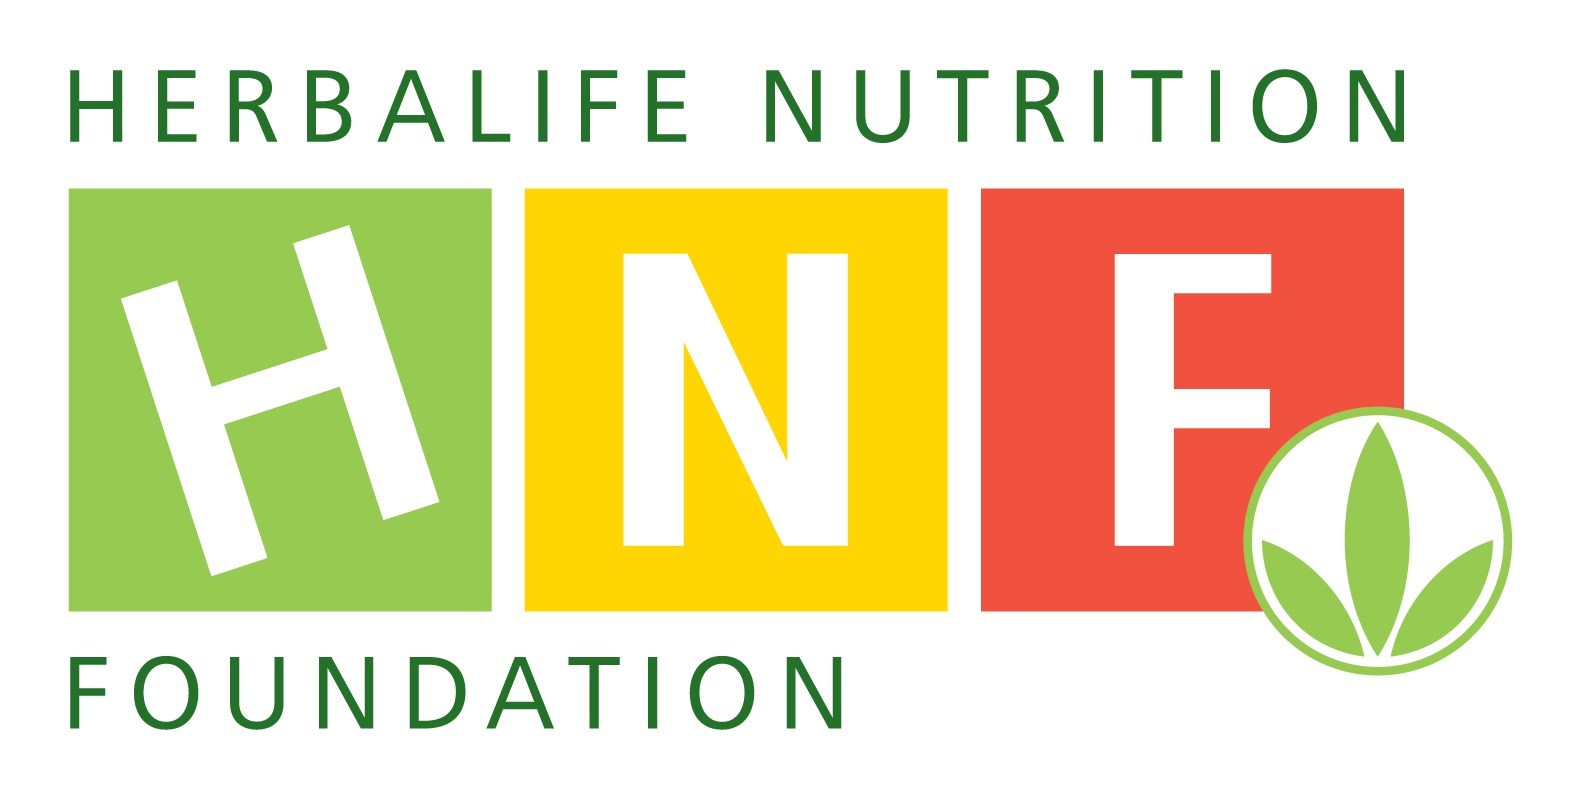 Herbalife Nutrition Foundation Raises $1.5 Million at Annual Event Supporting the Nutrition Needs of Underserved Children Around the World